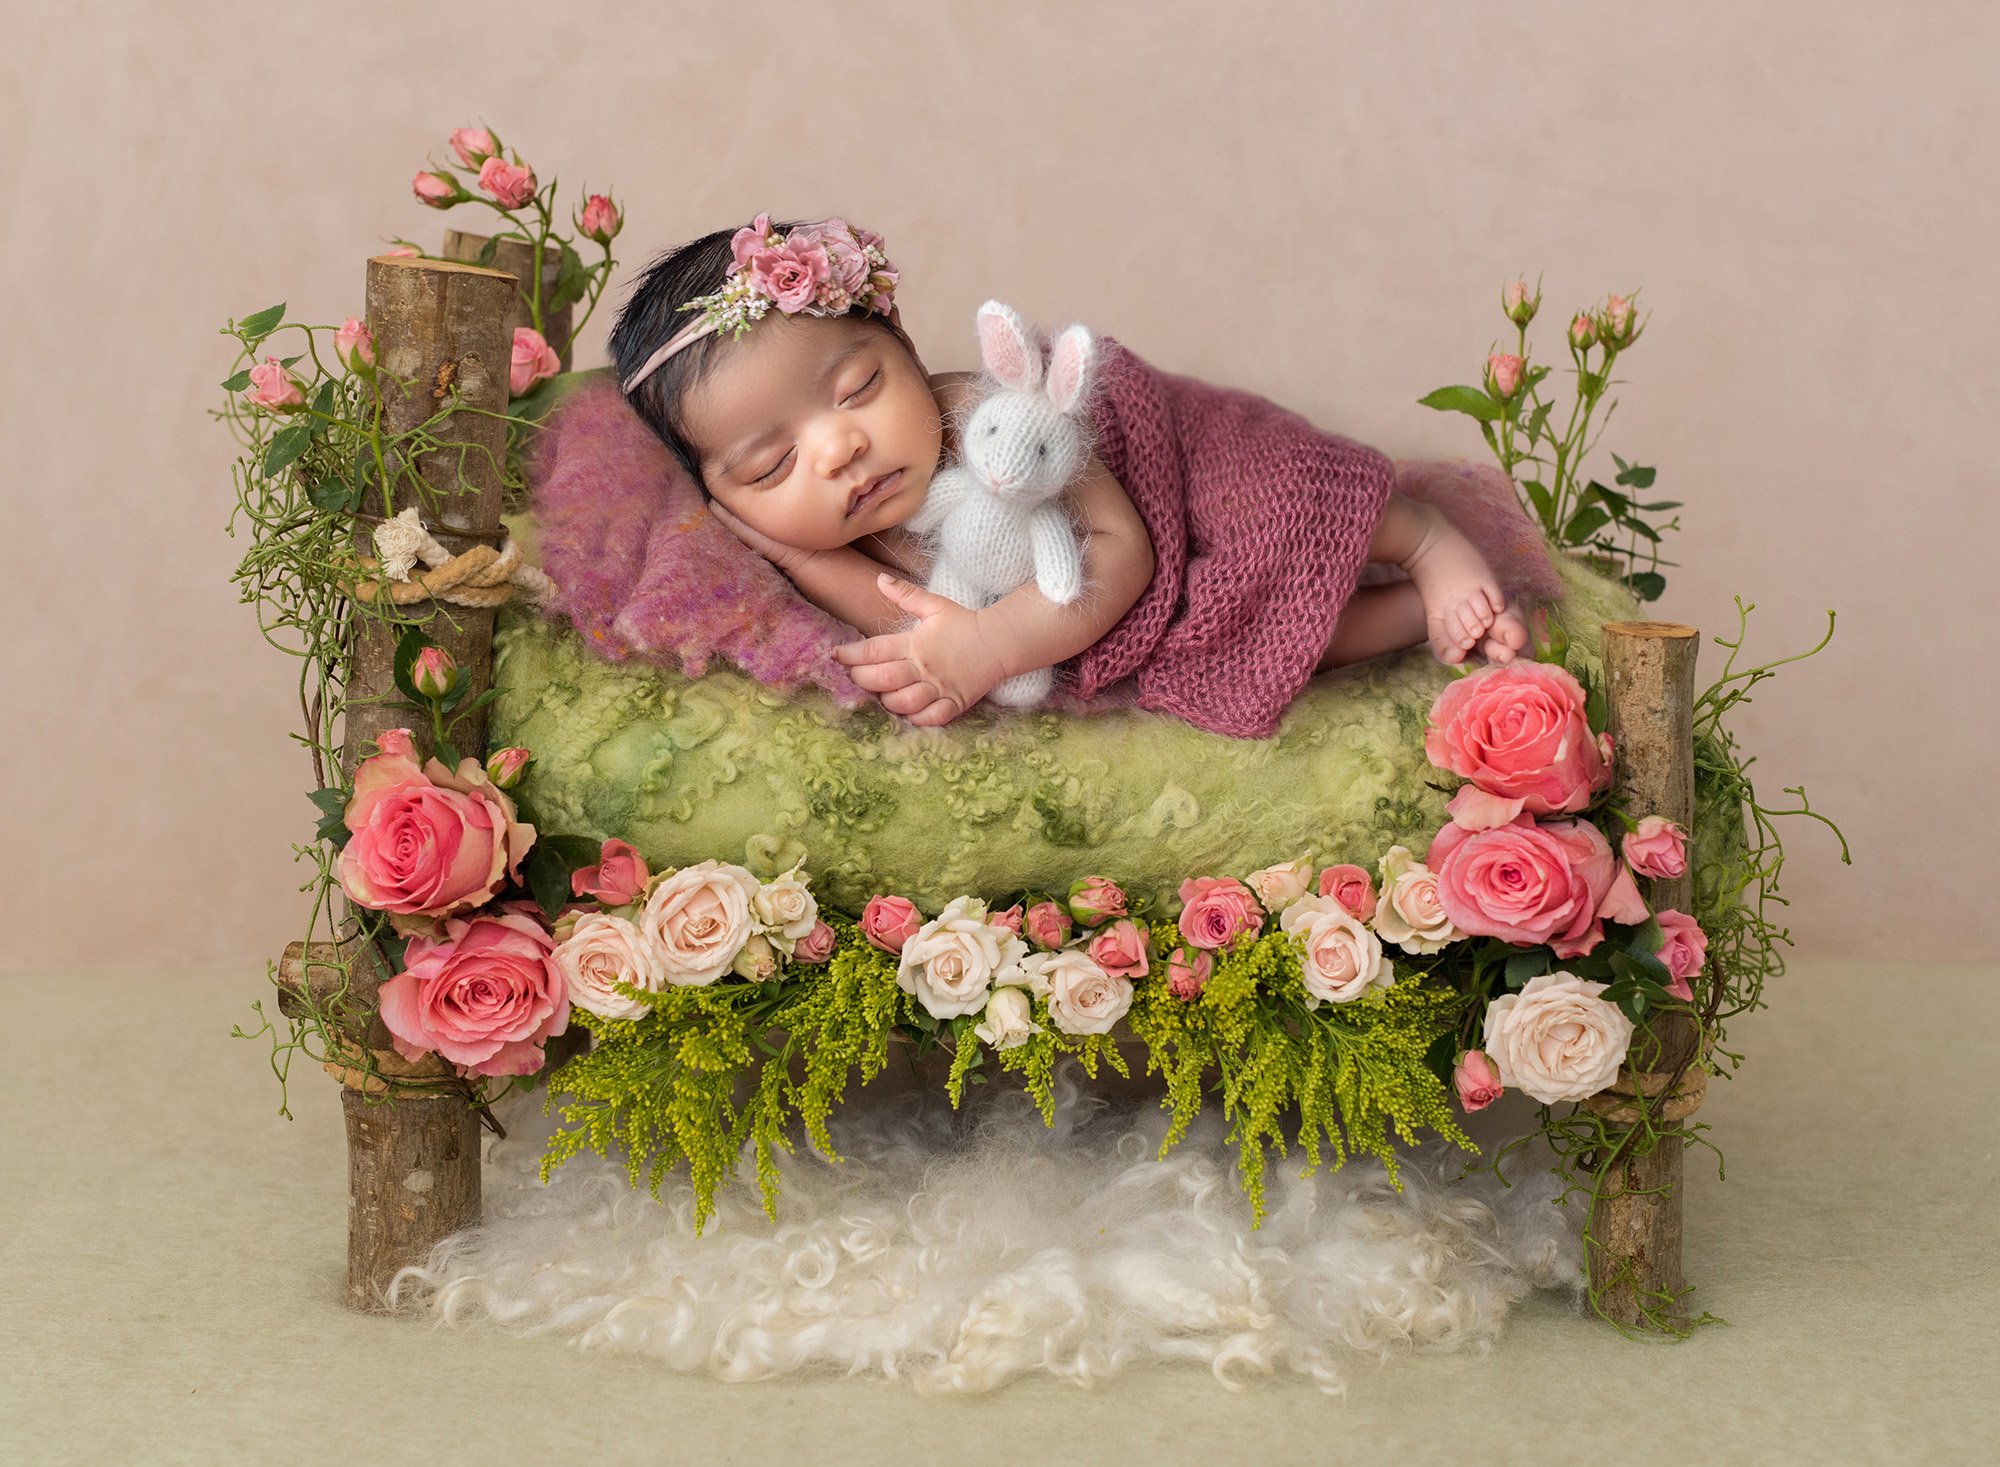 newborn baby girl sound asleep on wooden bed draped in mauve sweater wrap holding stuffed bunny surrounded by pink flowers and greenery atop a fuzzy blanket